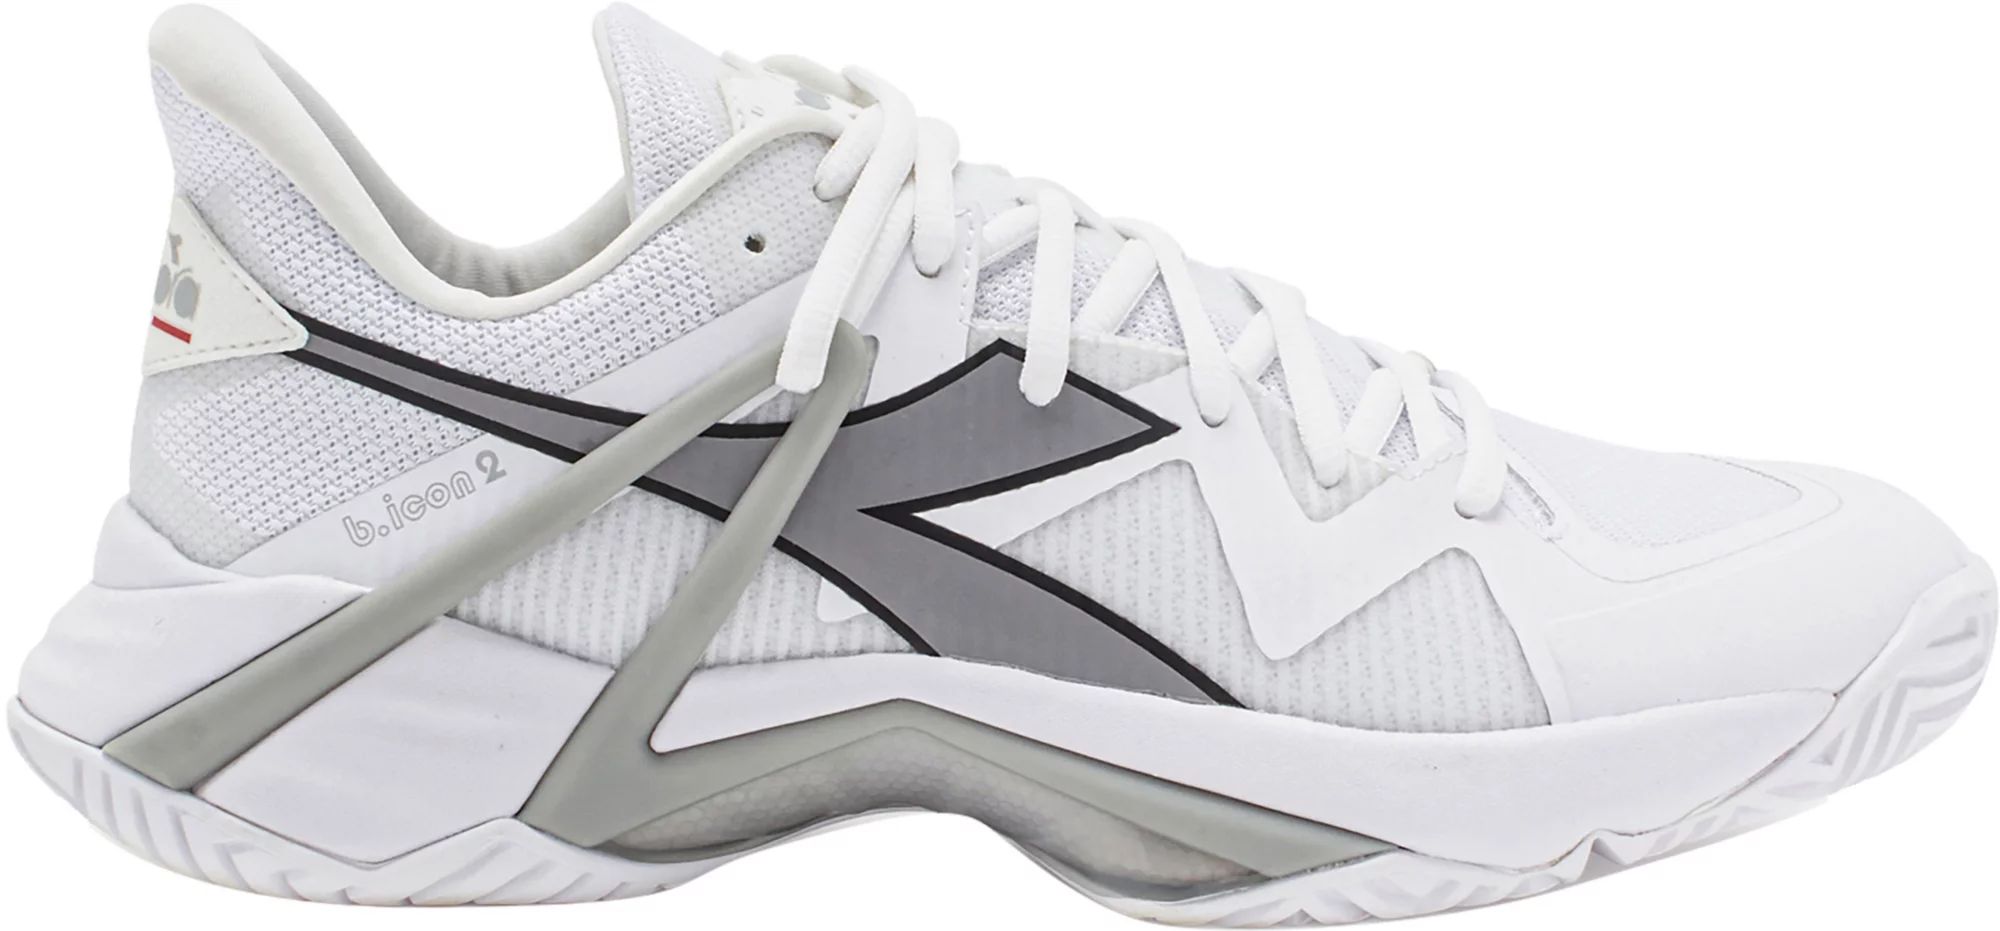 Diodora Men's B.Icon 2 AG Tennis Shoes, Size 9.5, White/Silver | Dick's Sporting Goods